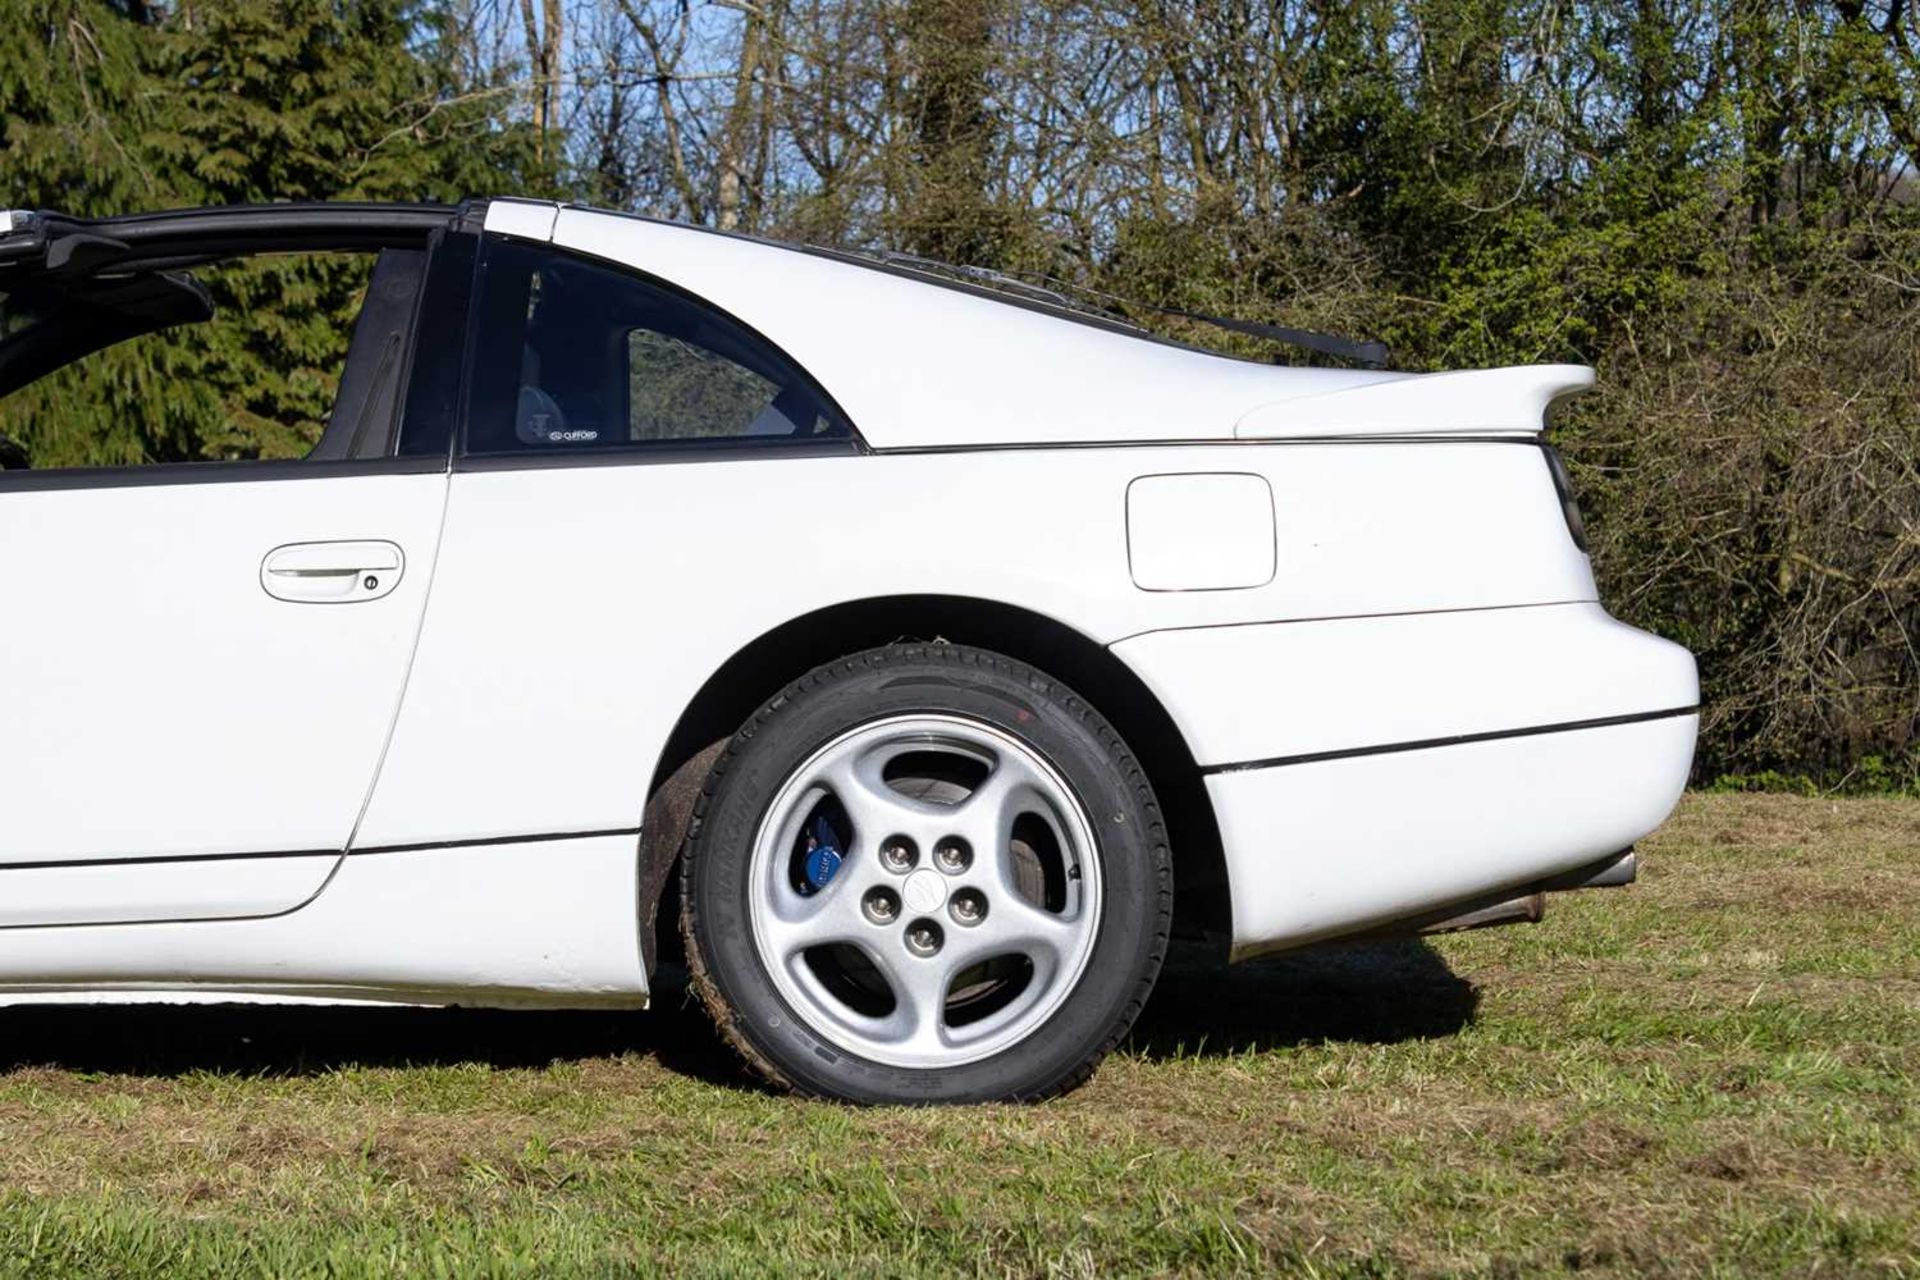 1990 Nissan 300ZX Turbo 2+2 Targa One of the last examples registered in the UK - Image 27 of 89